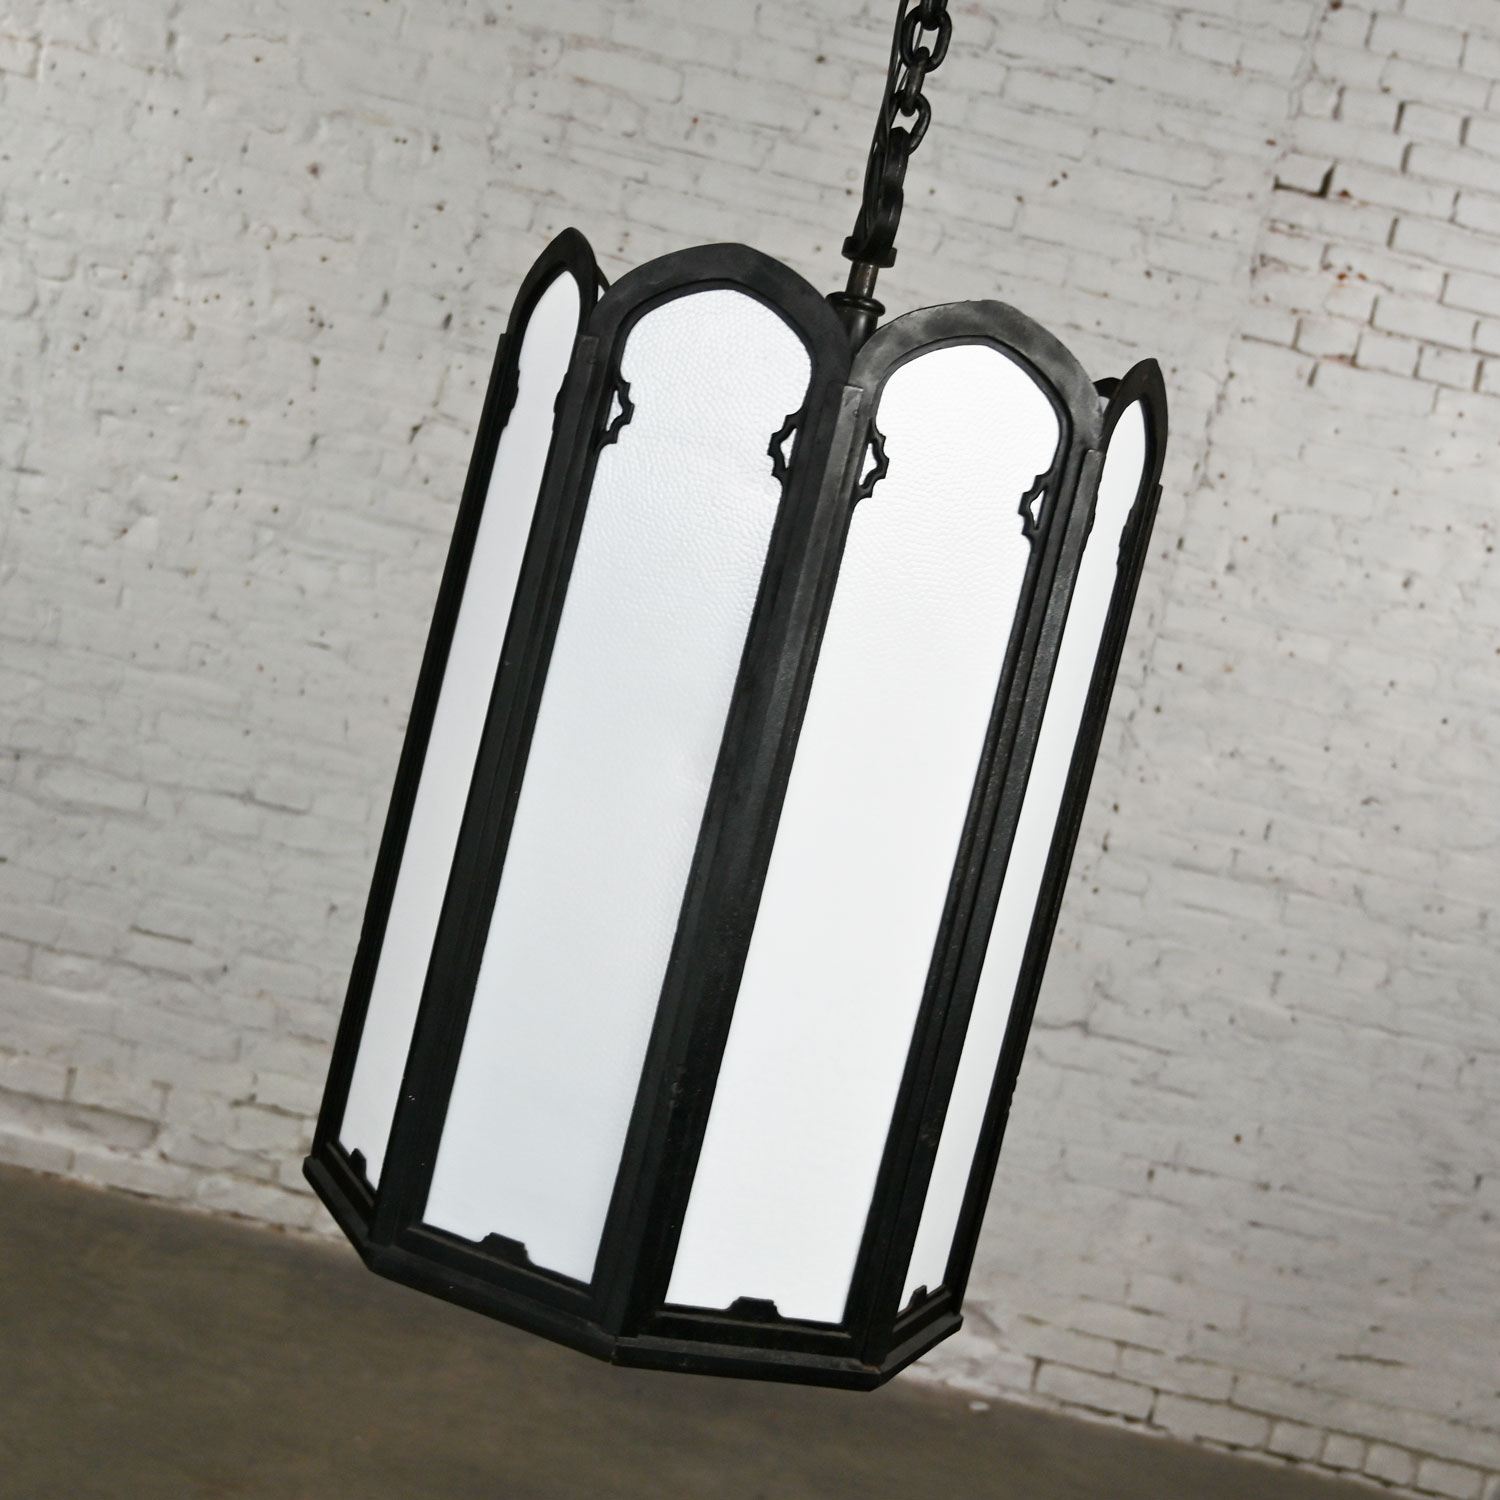 4 Large Vintage Gothic or Art Deco Black Painted Wrought Iron & White Milk Glass Light Fixtures Selling Separately